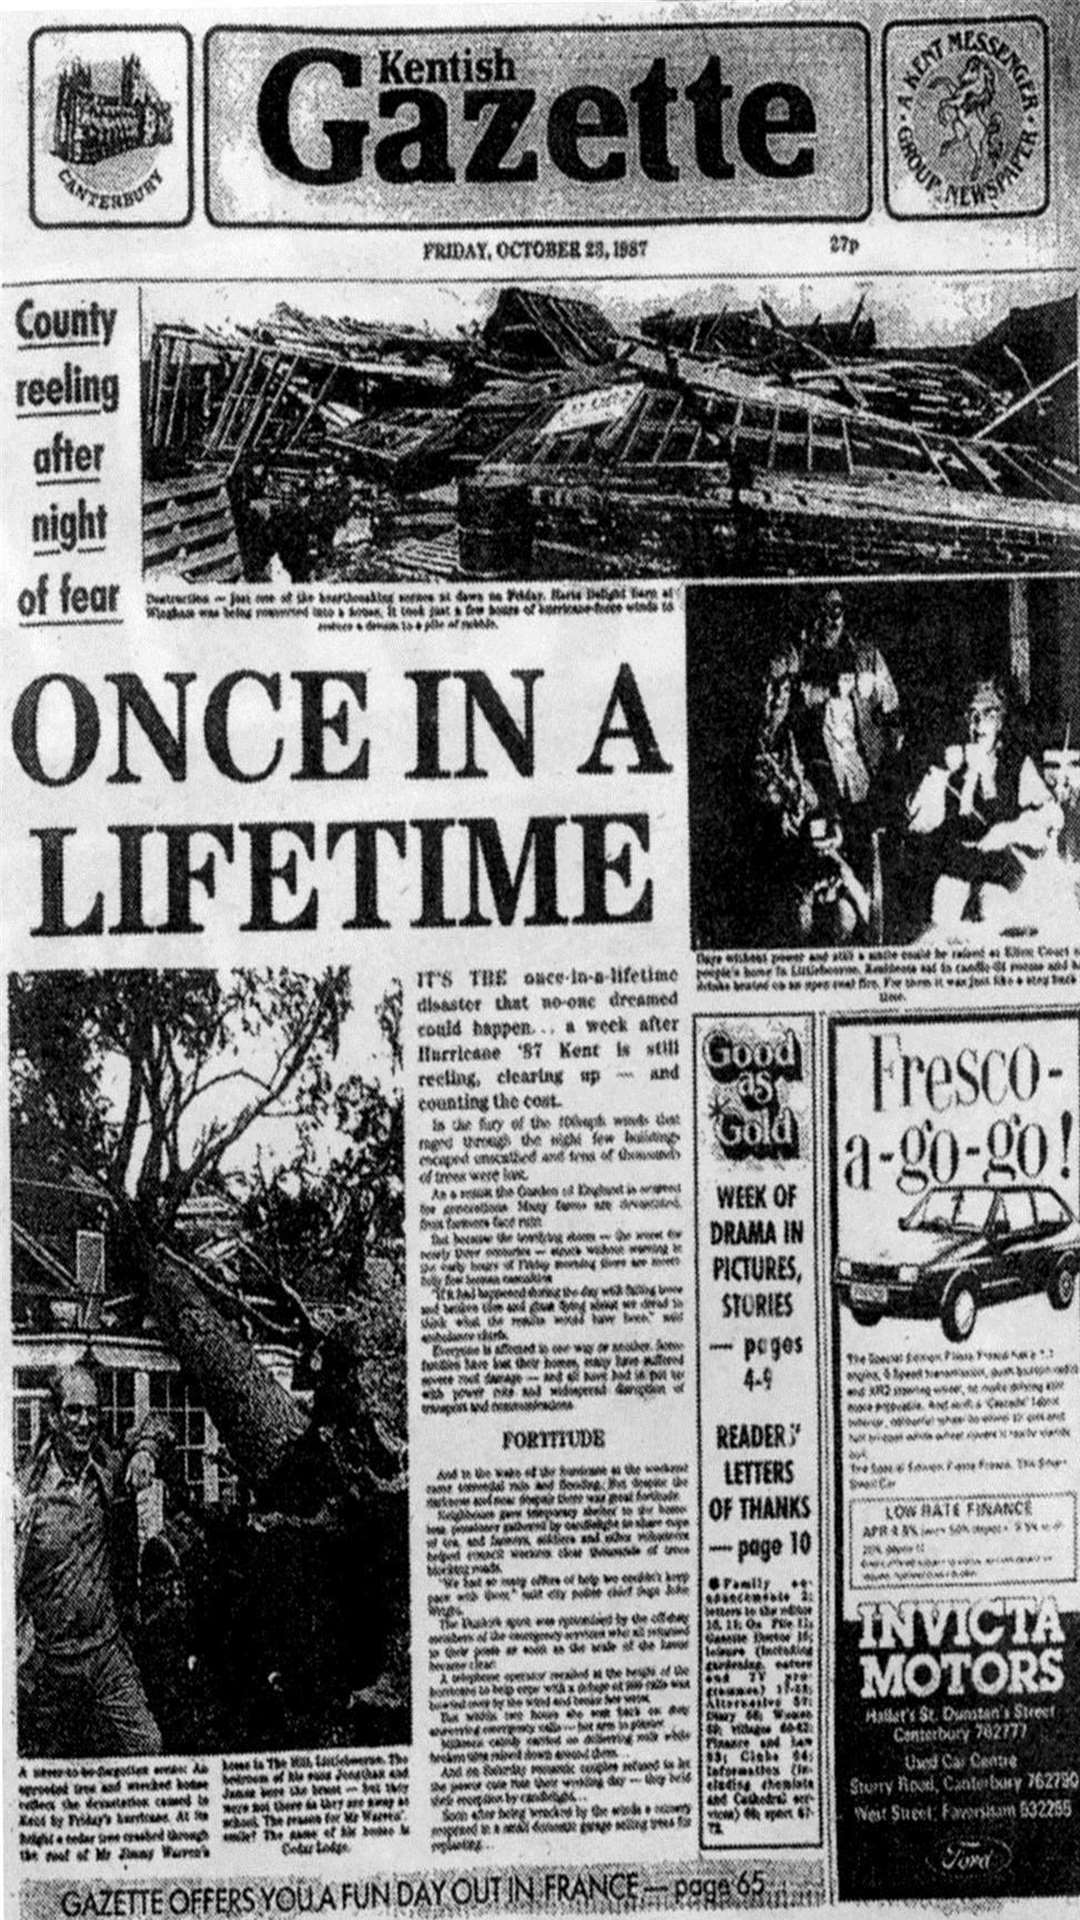 How the Gazette reported the aftermath of the Great Storm